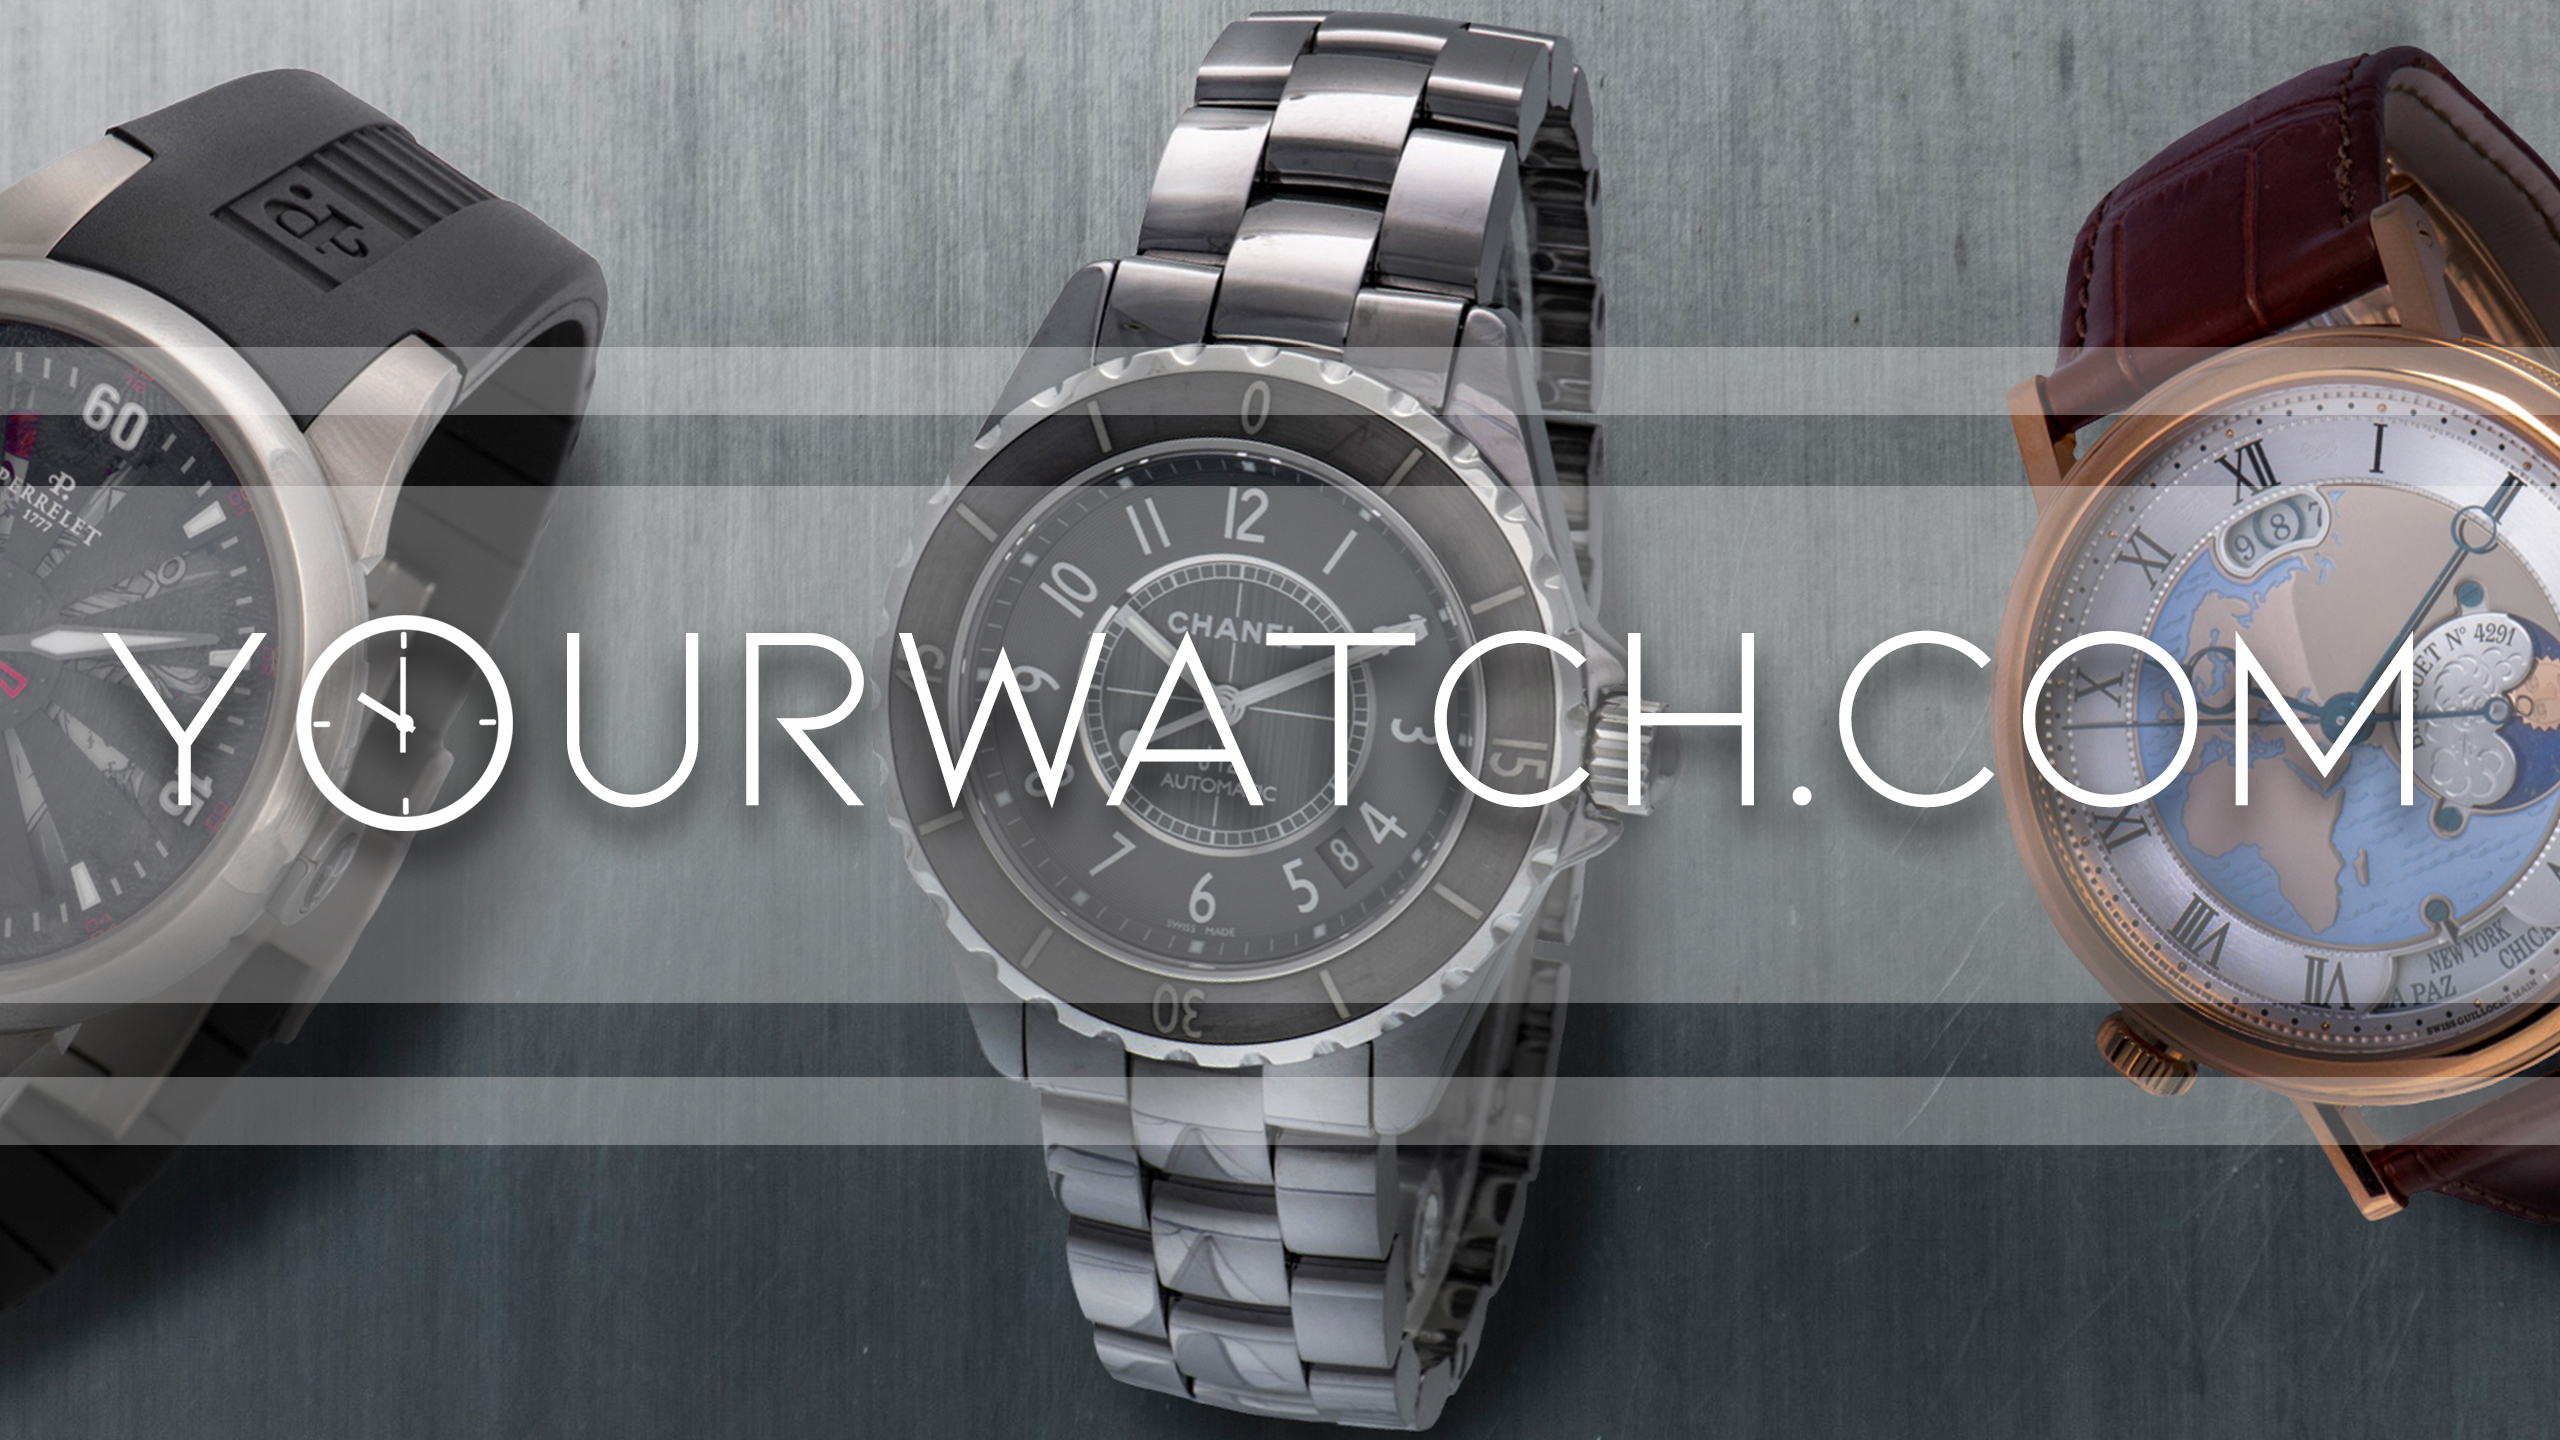 YourWatch.com, Wednesday, March 6, 2019, Press release picture